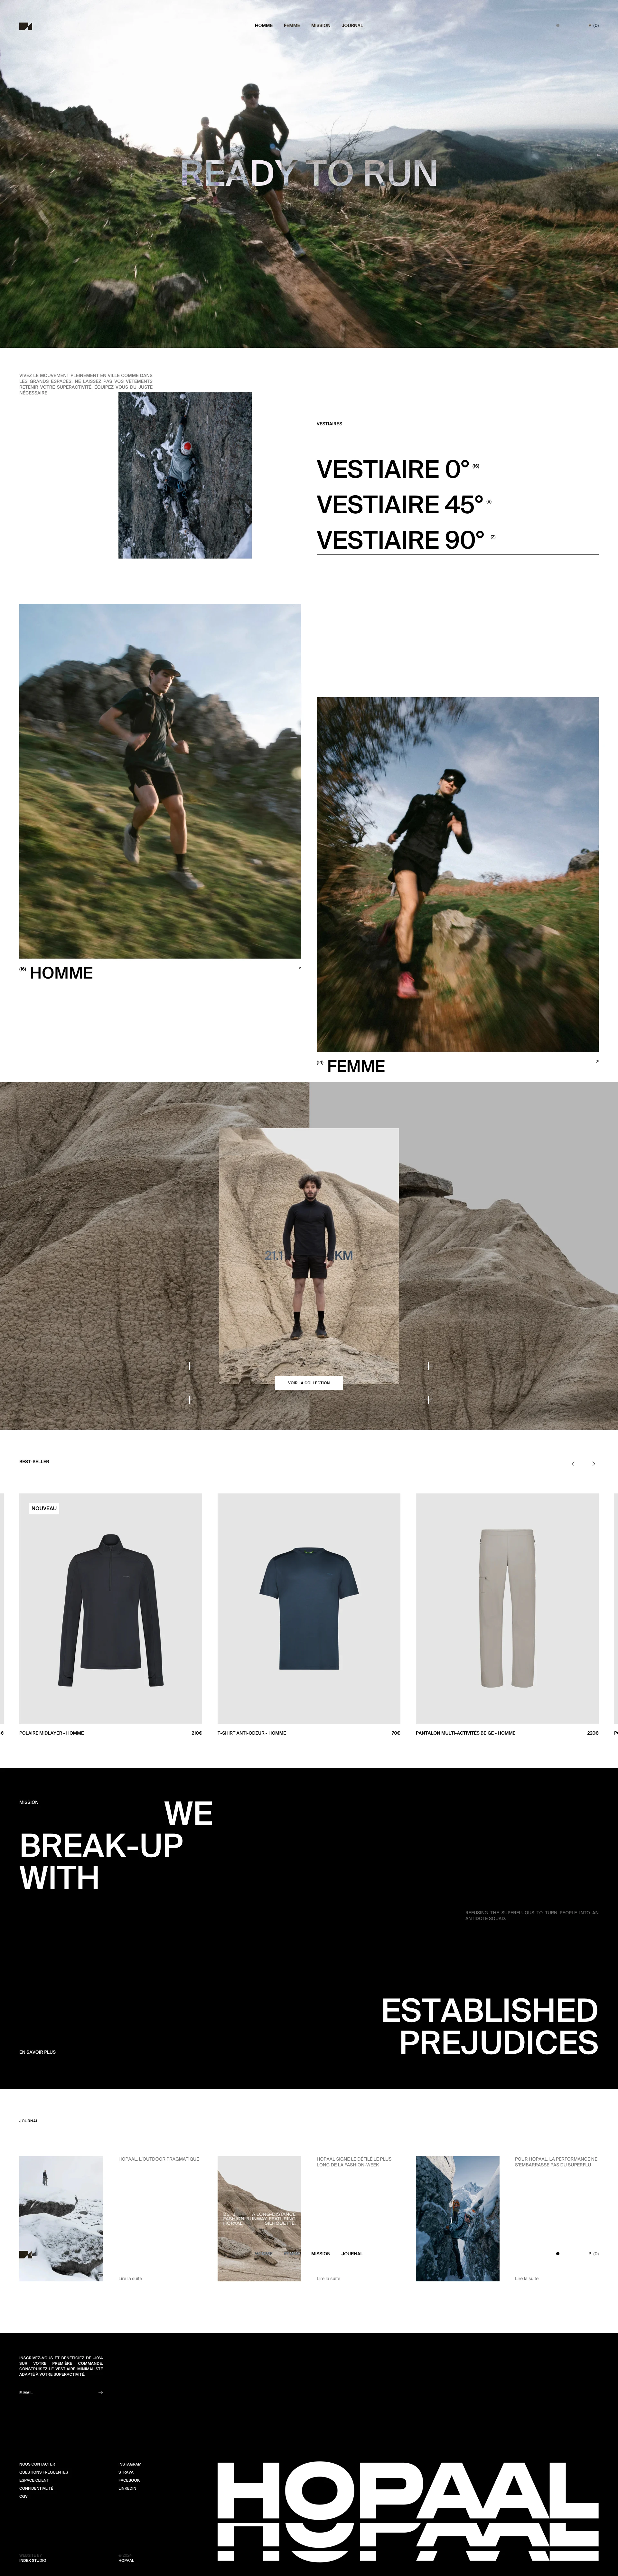 HOPAAL Landing Page Example: Experience the movement fully in the city as well as in the great outdoors. Don't let your clothes hold back your superactivity, equip yourself with just what you need.